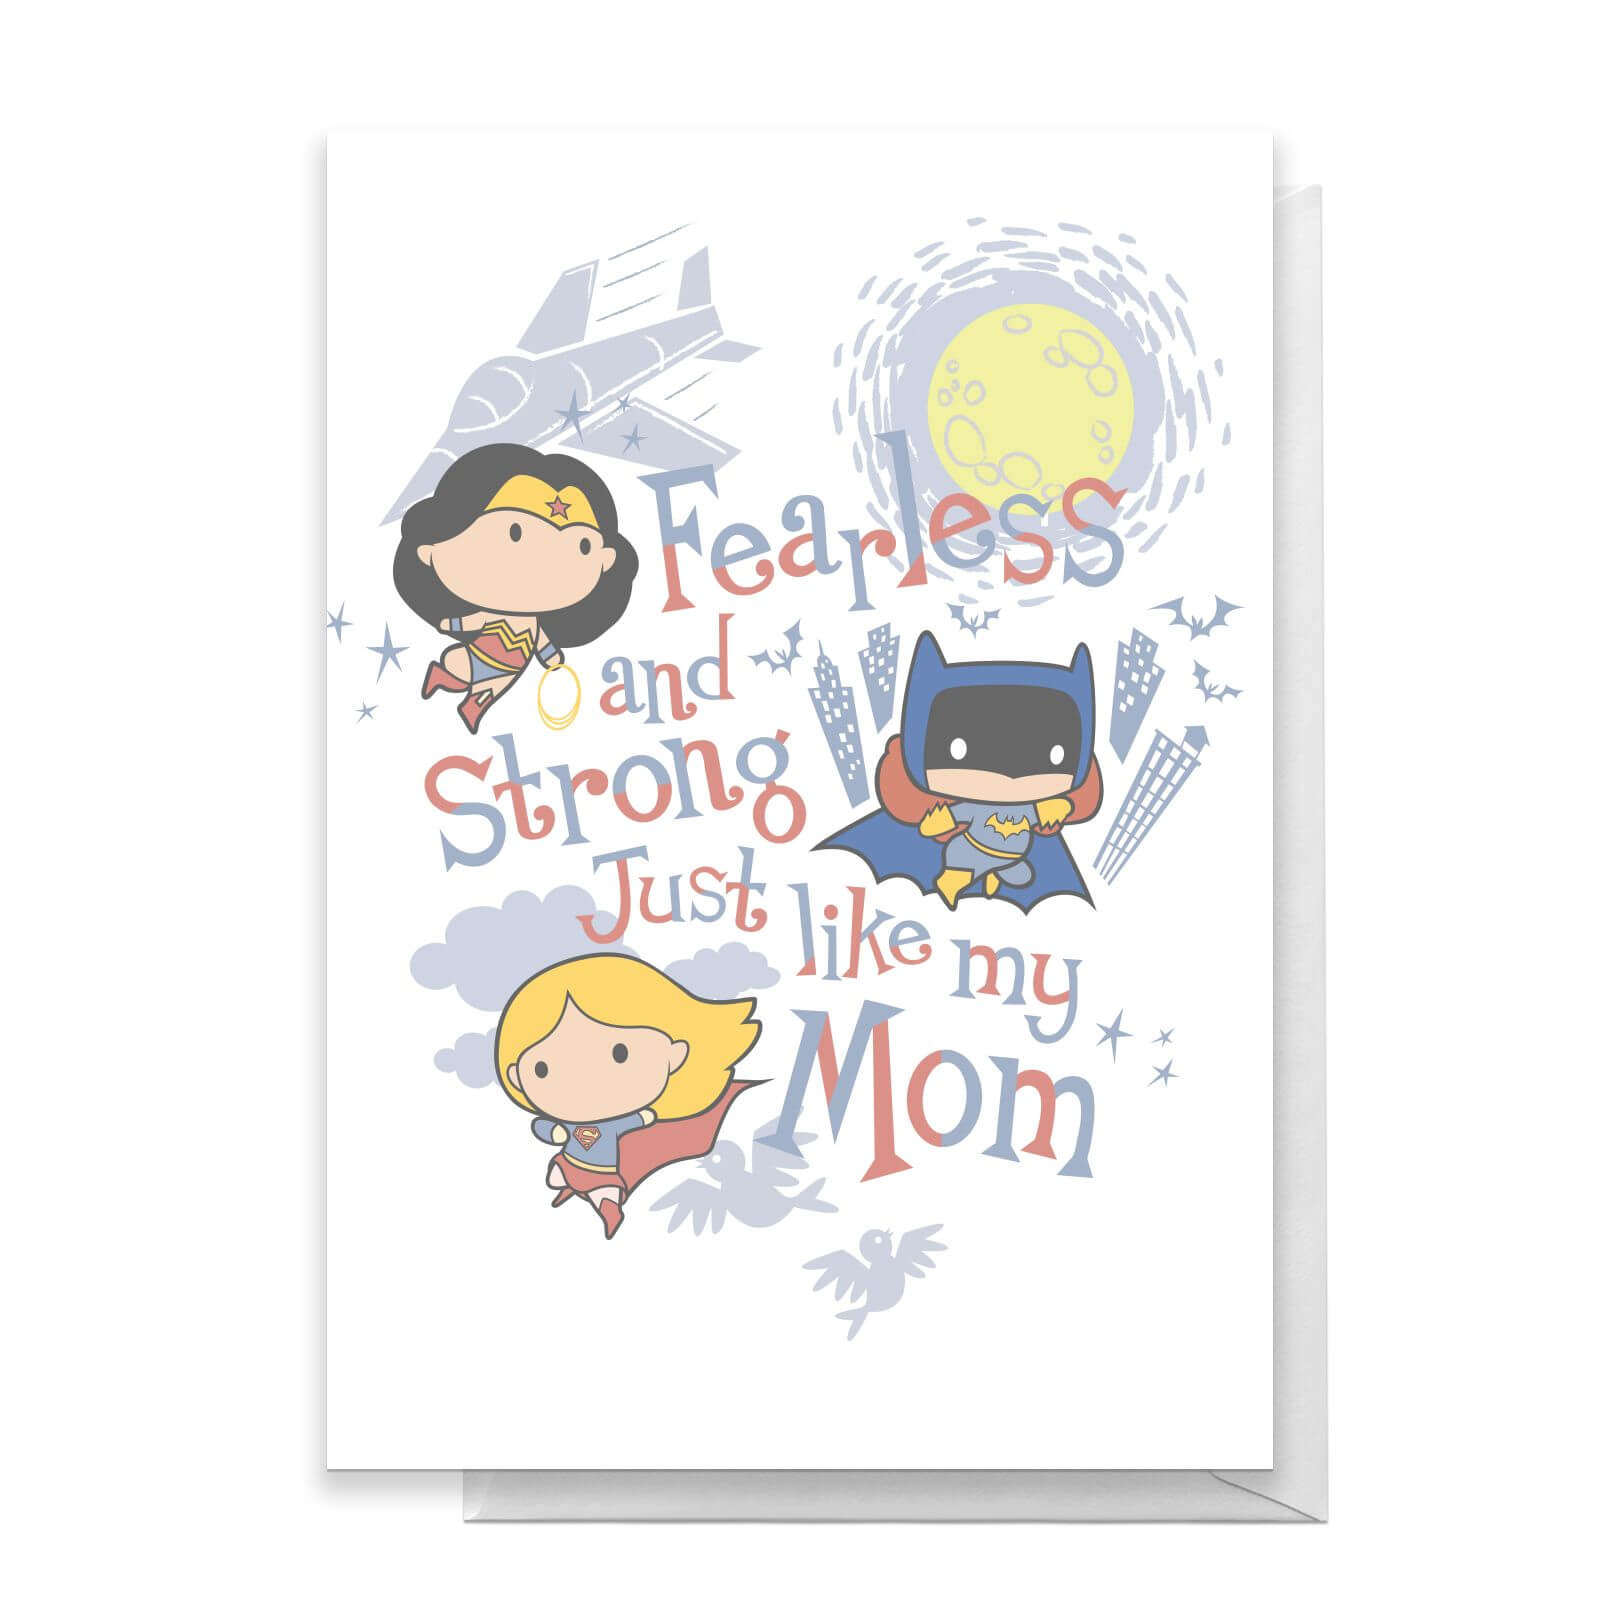 DC Happy Mother's Day Greetings Card - Standard Card